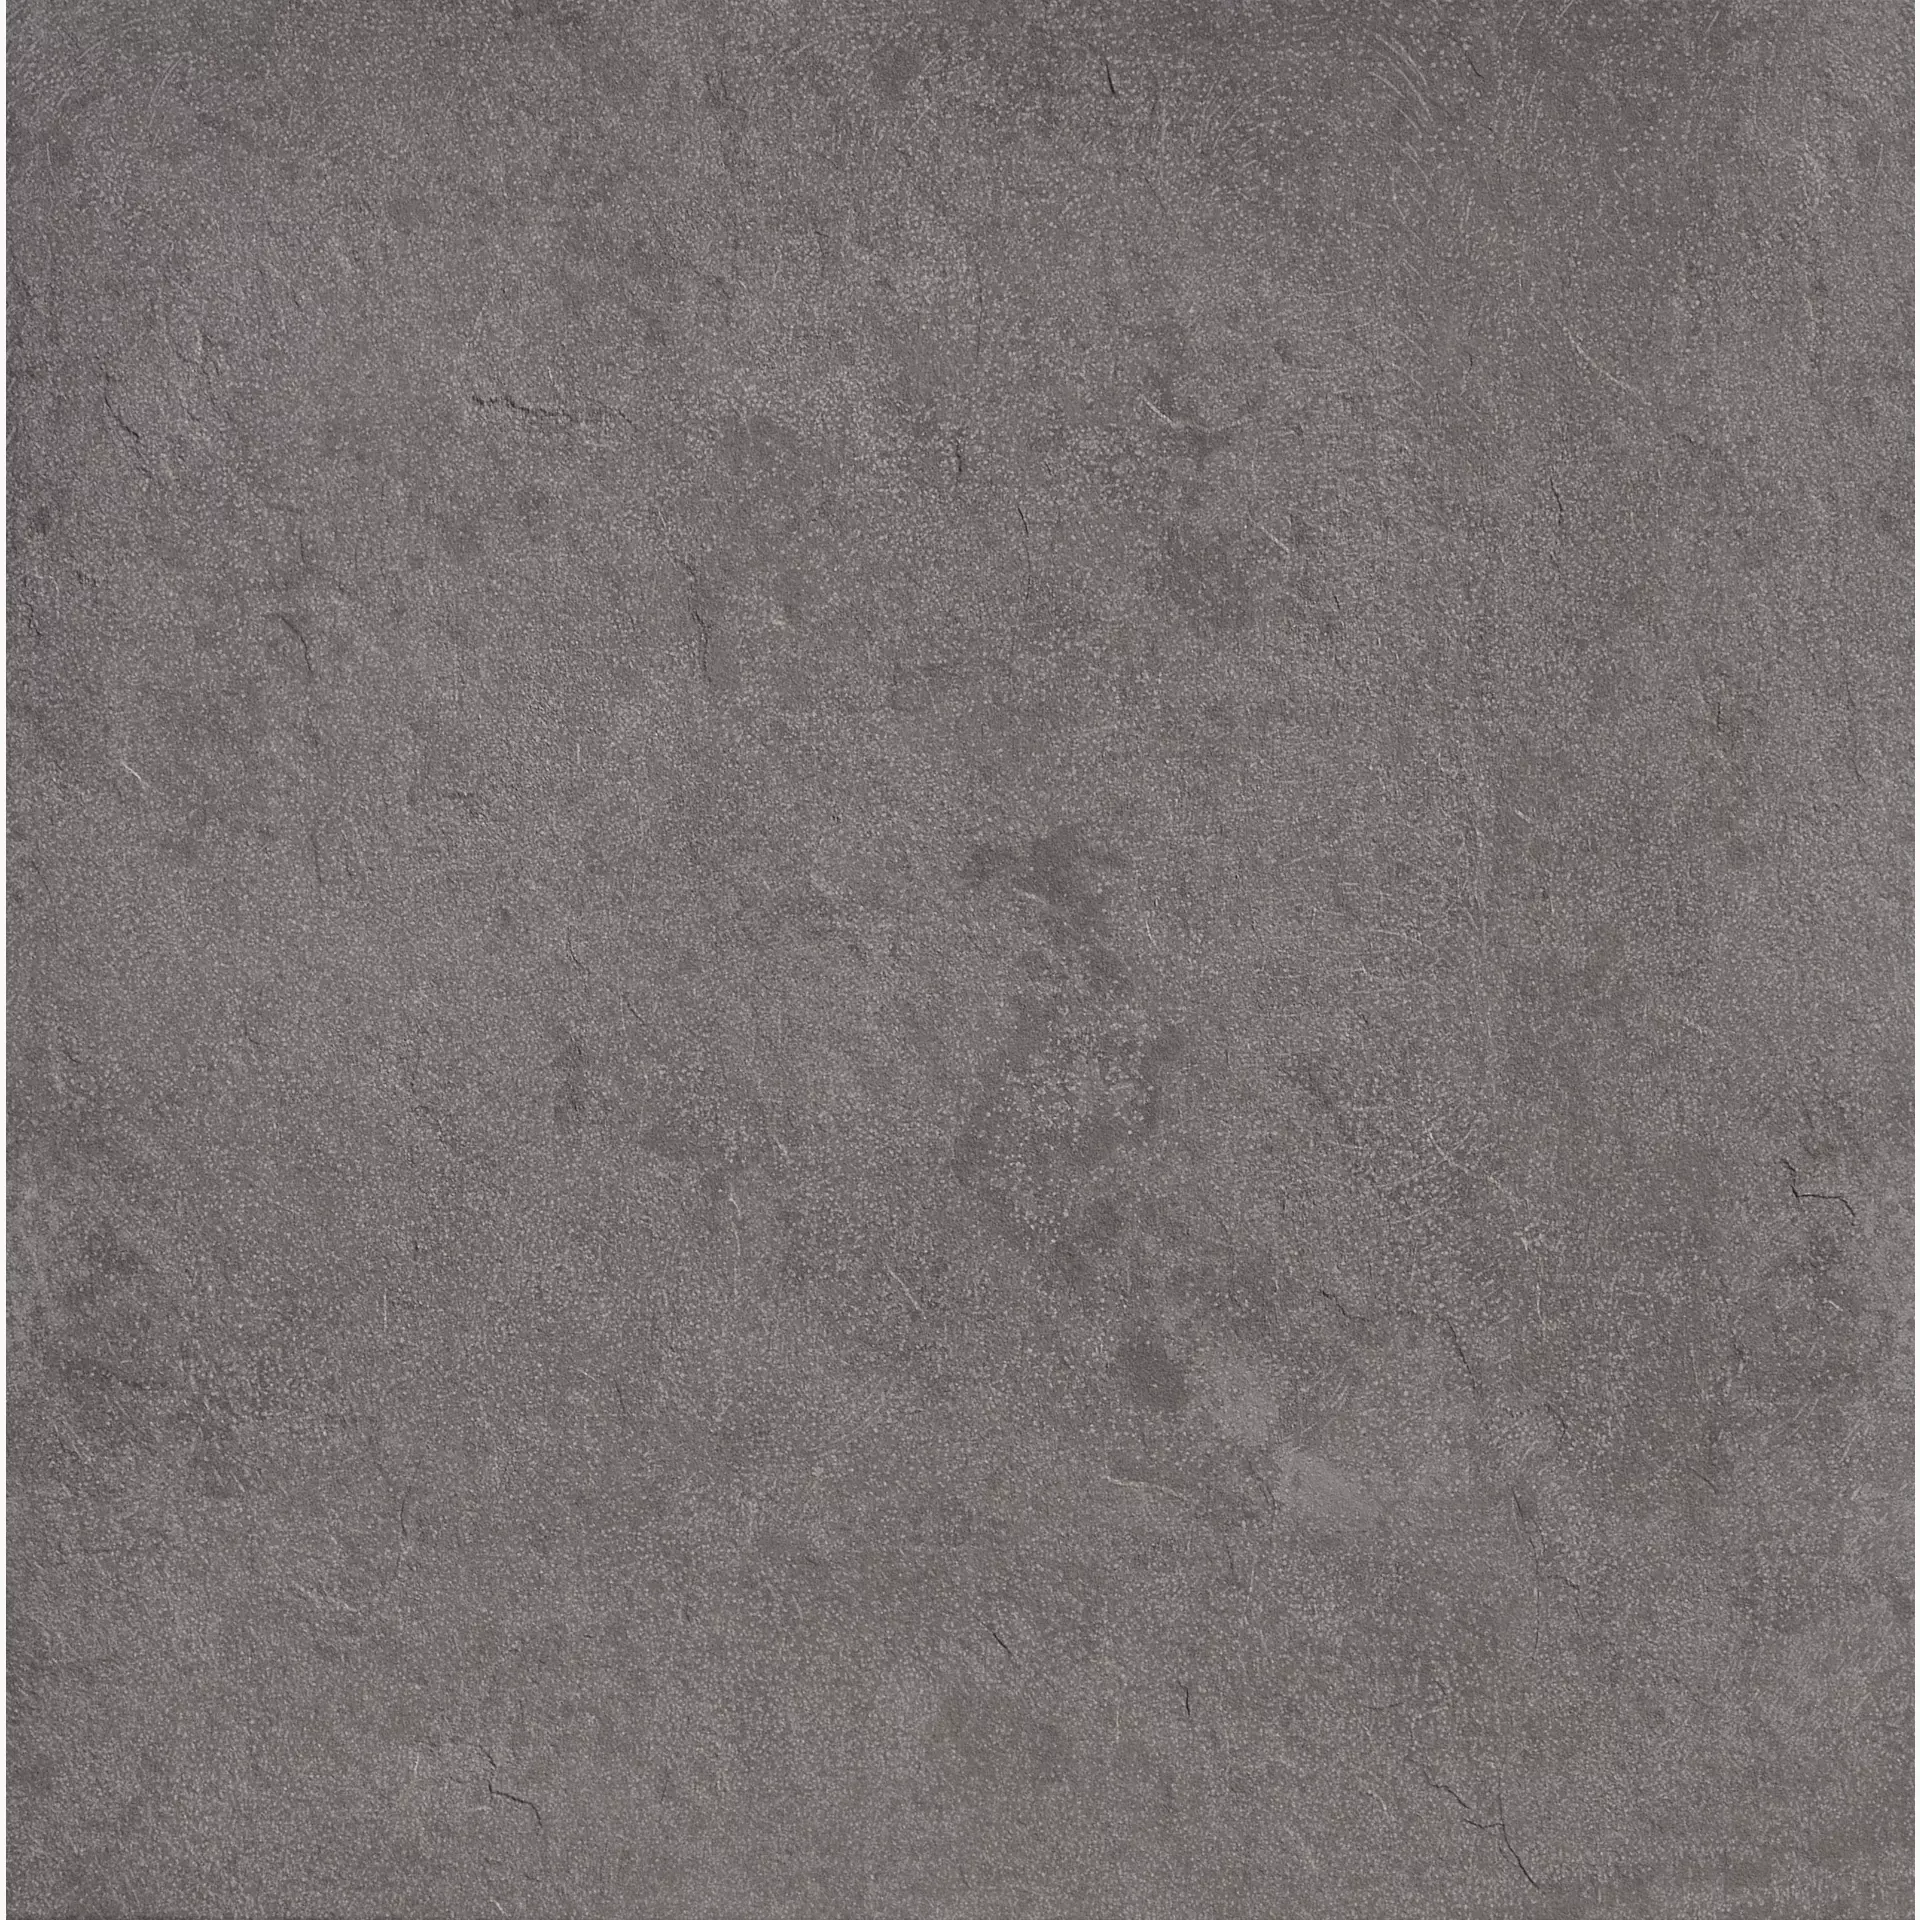 Coem Ardesia Mix Antracite Naturale Base AR607BR 60x60cm rectified 10mm